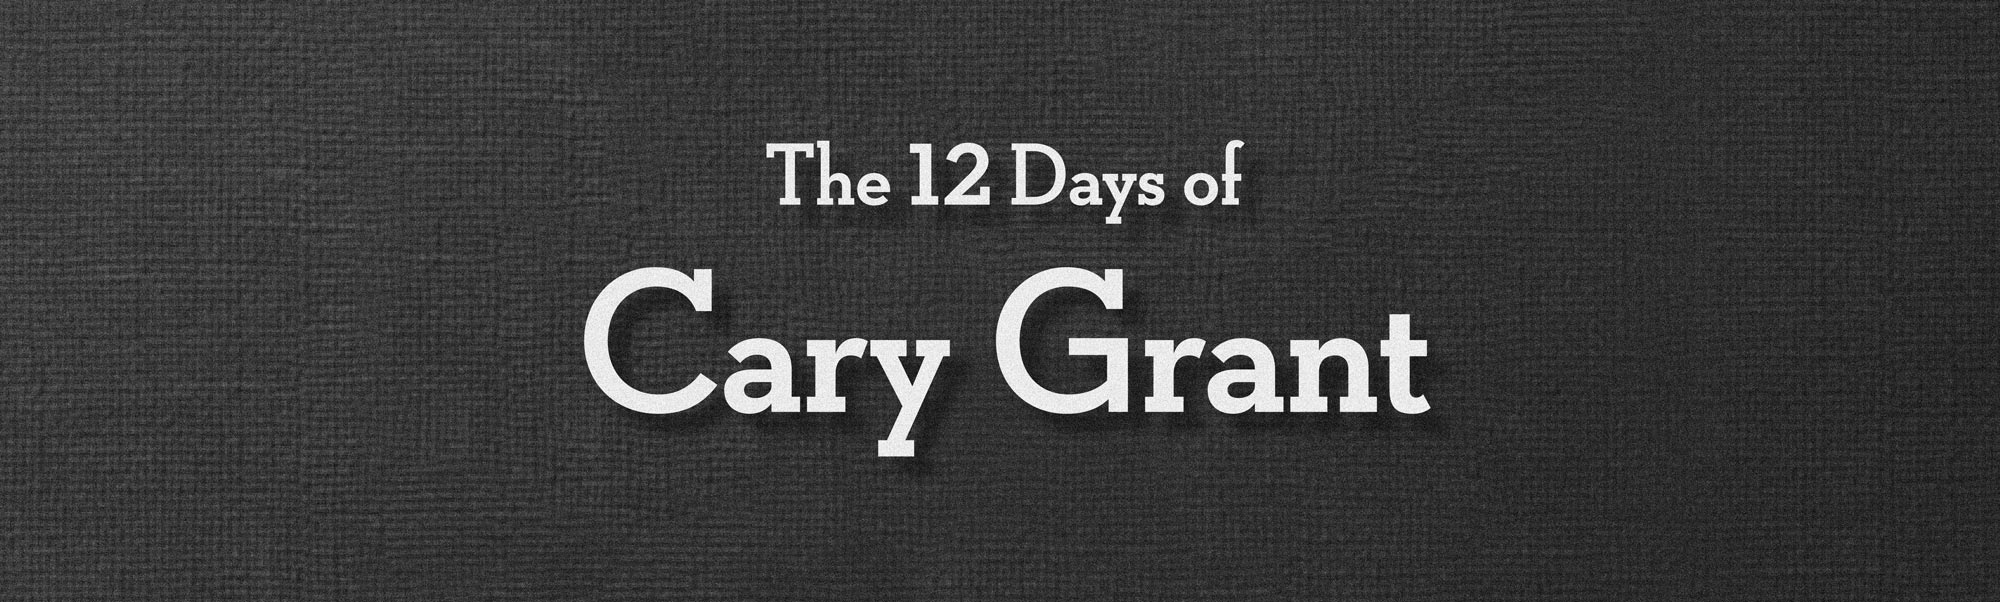 The Twelve Days of Cary Grant, 2016